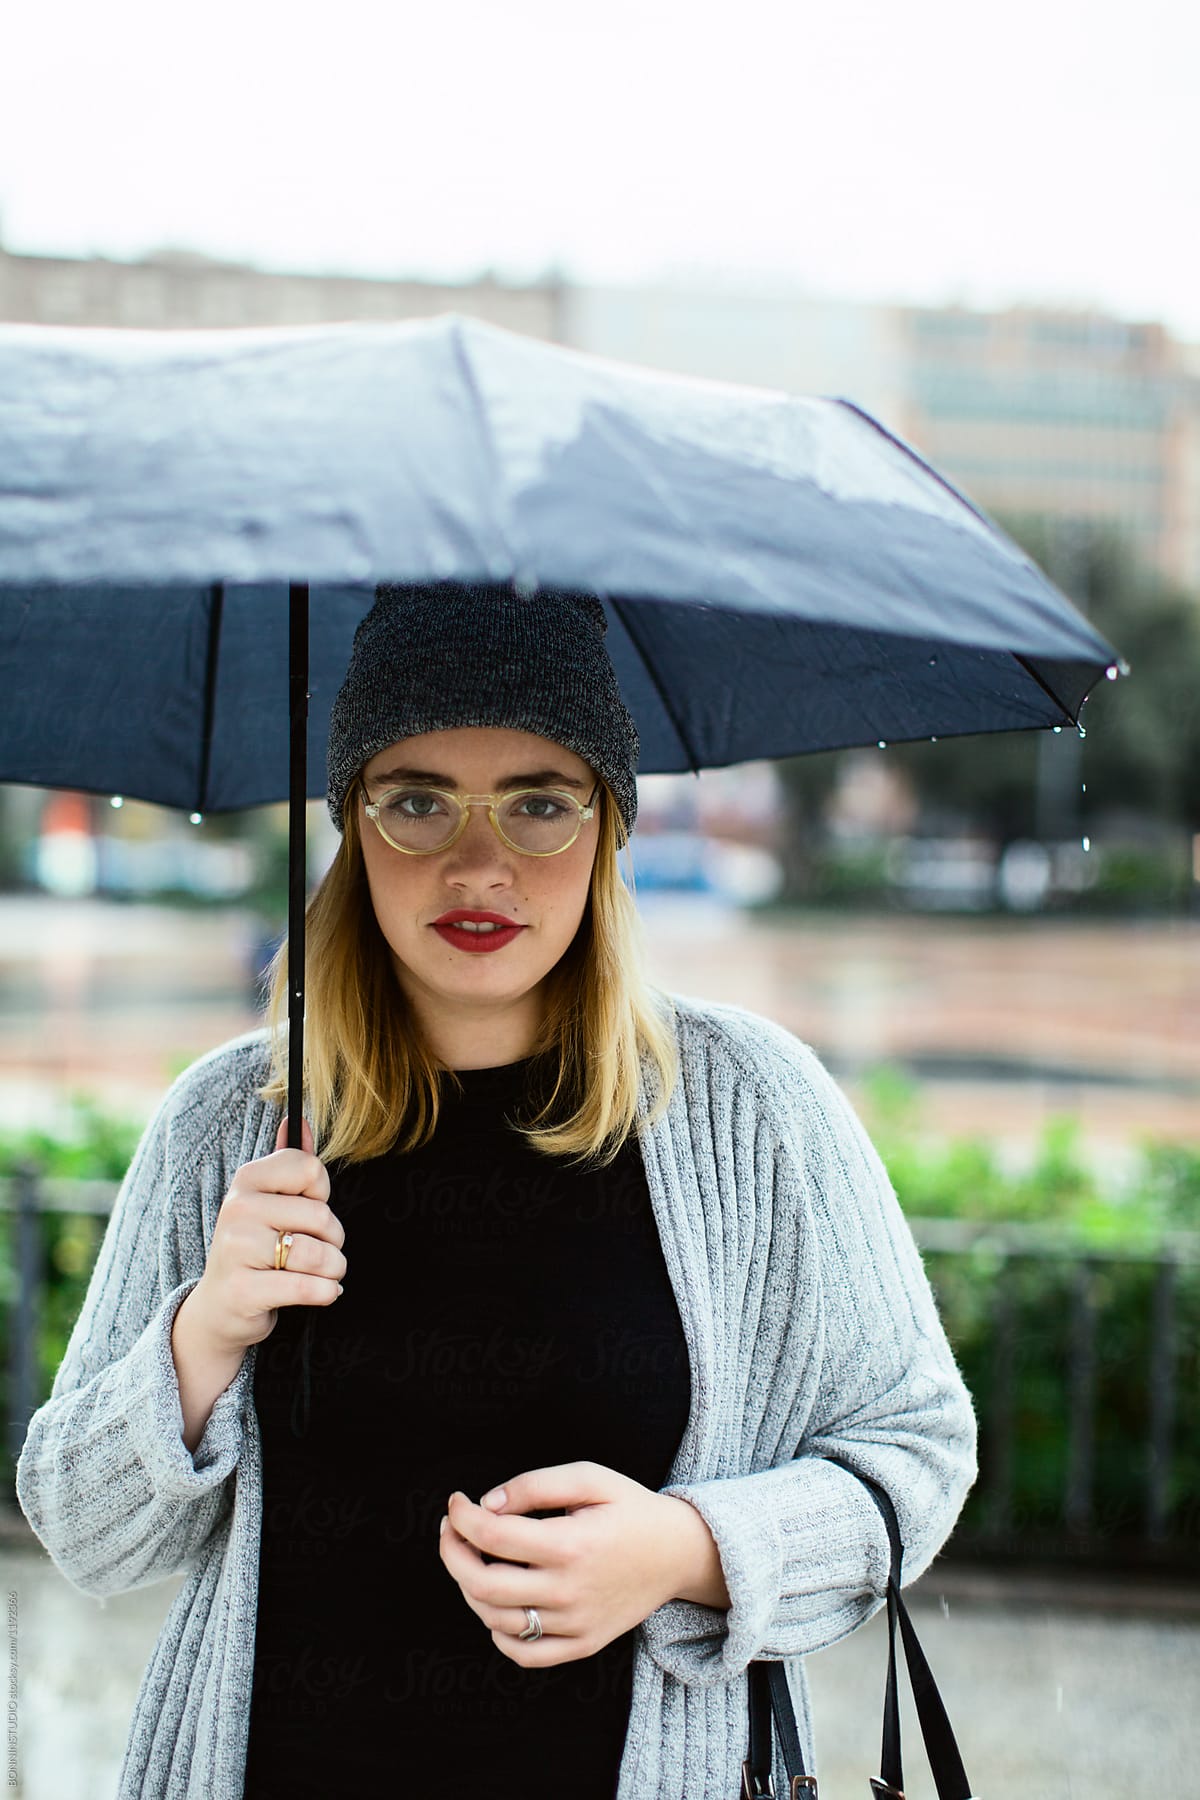 Portrait of a curvy woman holding an umbrella in a rainy day.